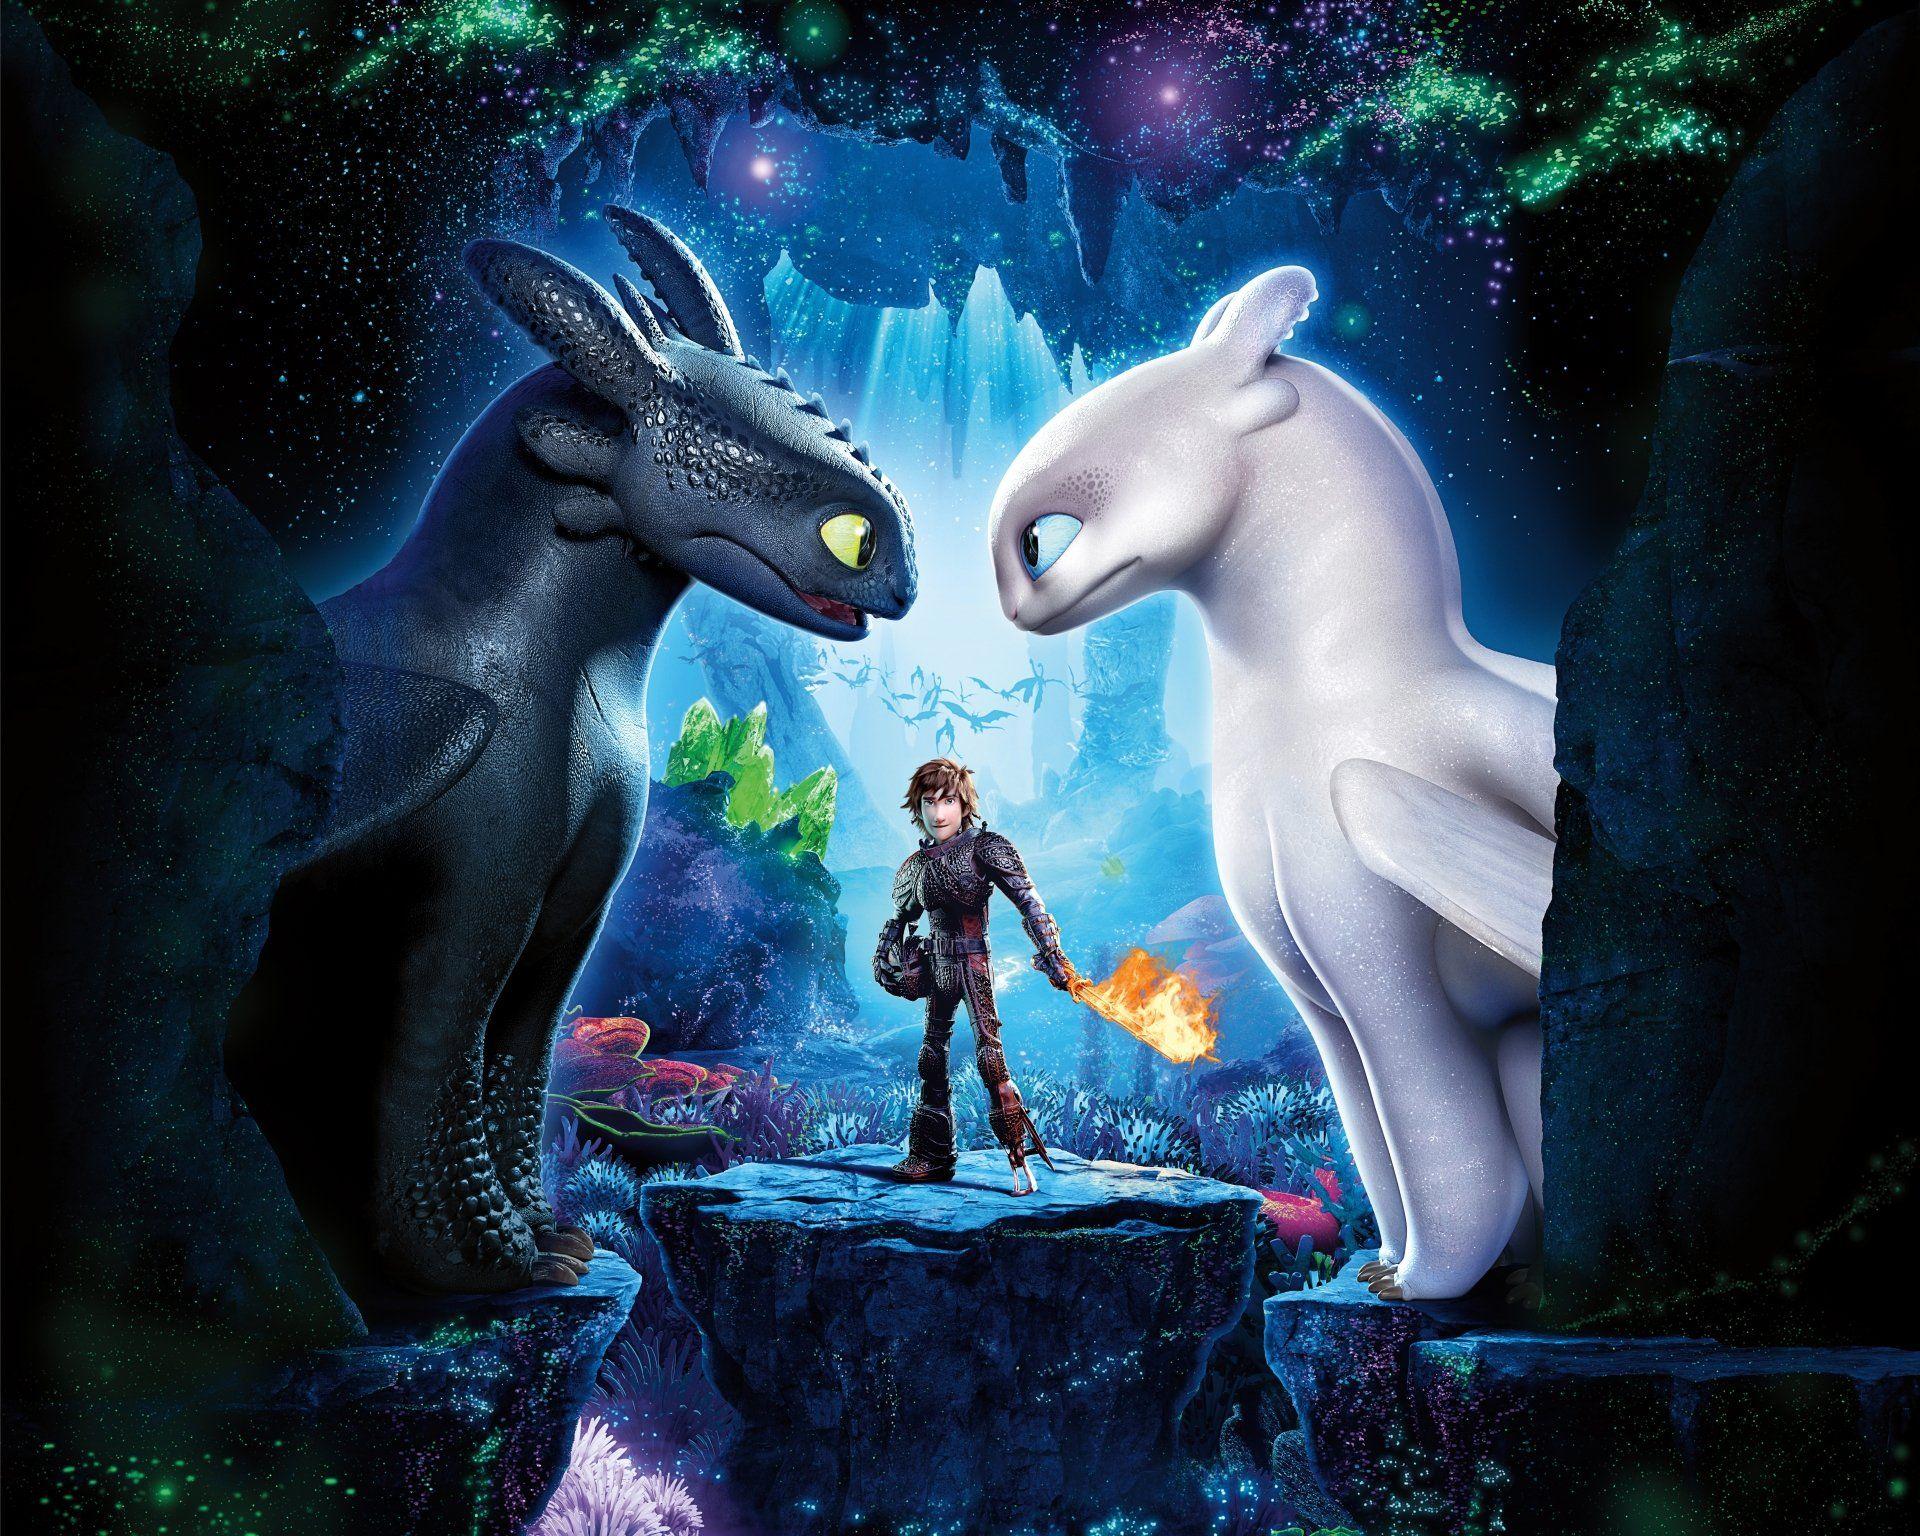 Cool How To Train Your Dragon Background Image and Wallpaper